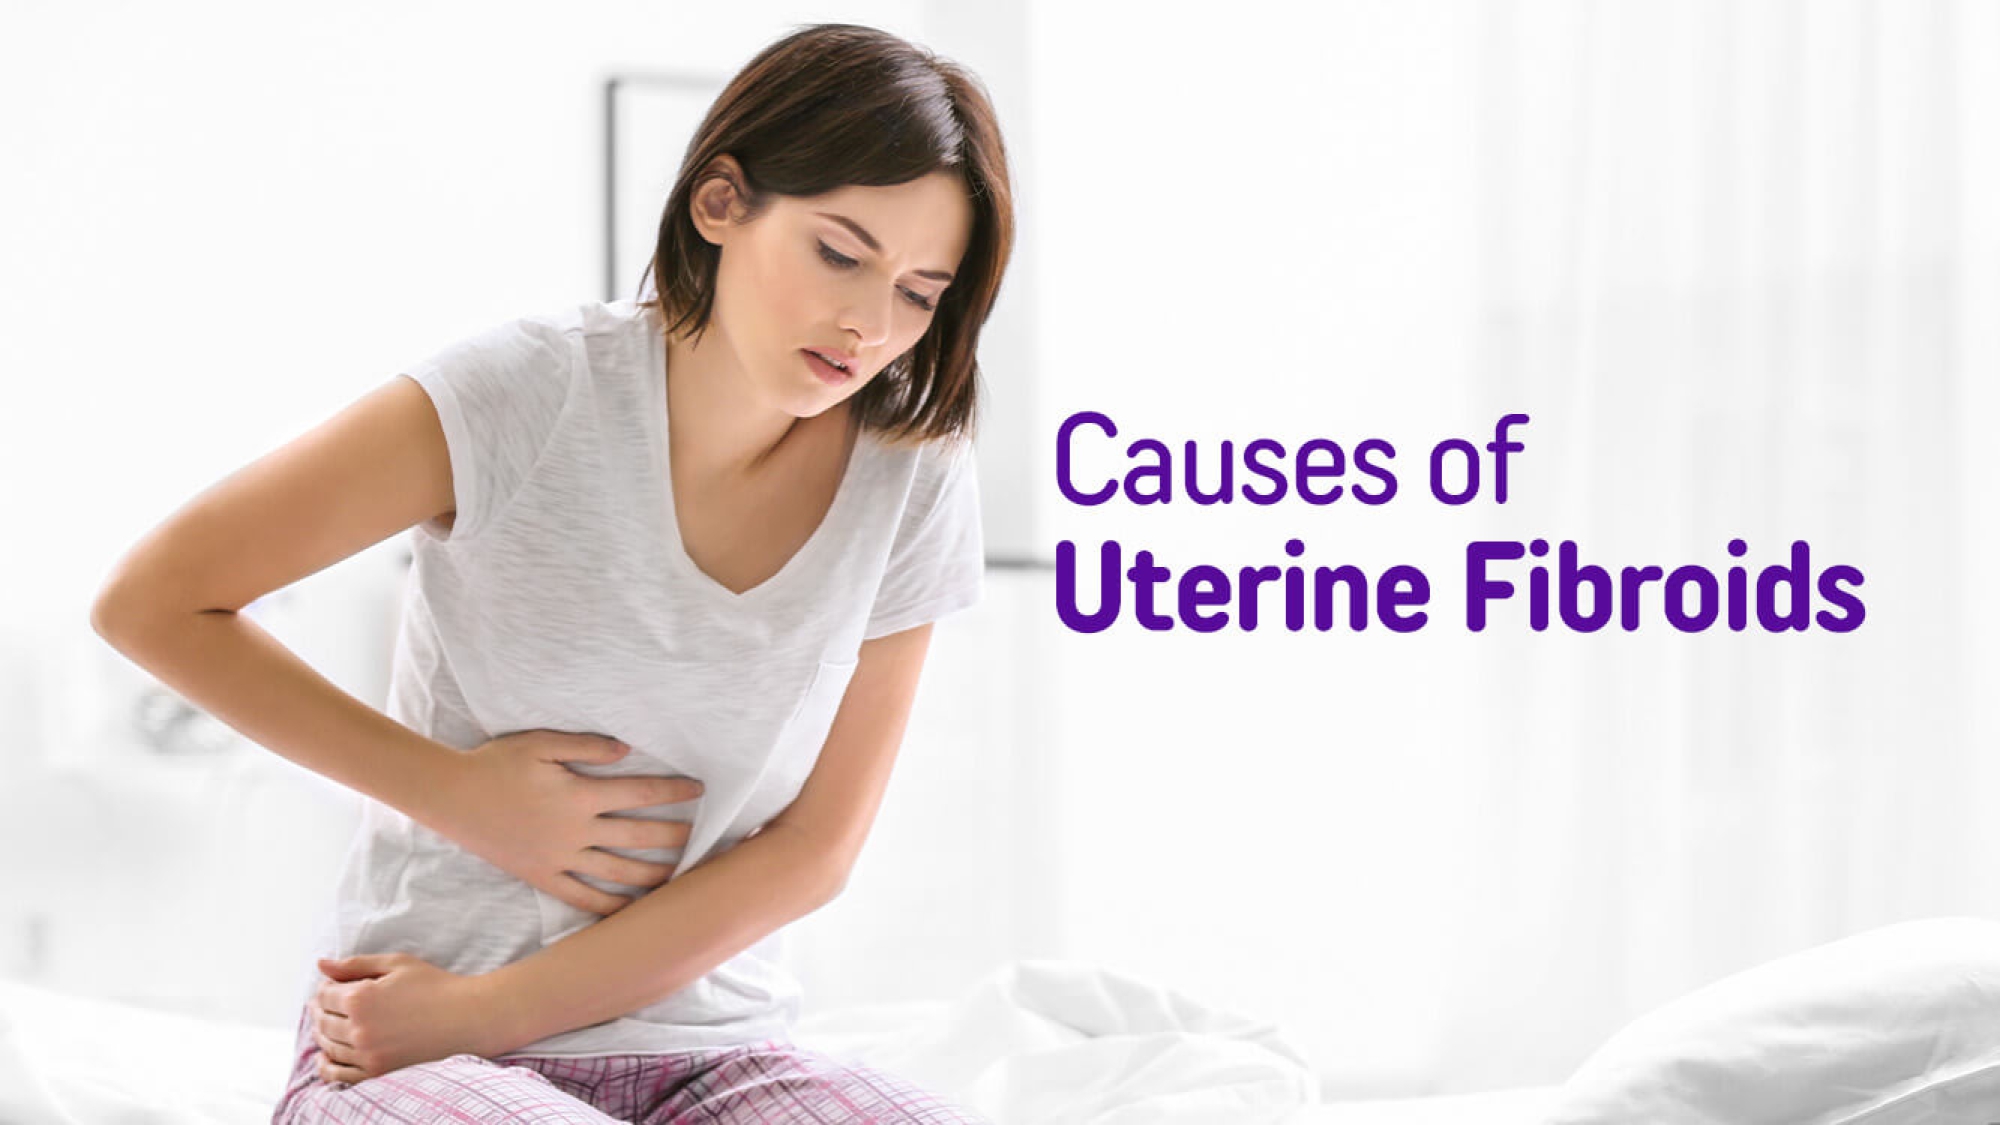 Uterine-Fibroids-Symptoms-Causes-and-Impact-on-Fertility-Banker-IVF-02-1